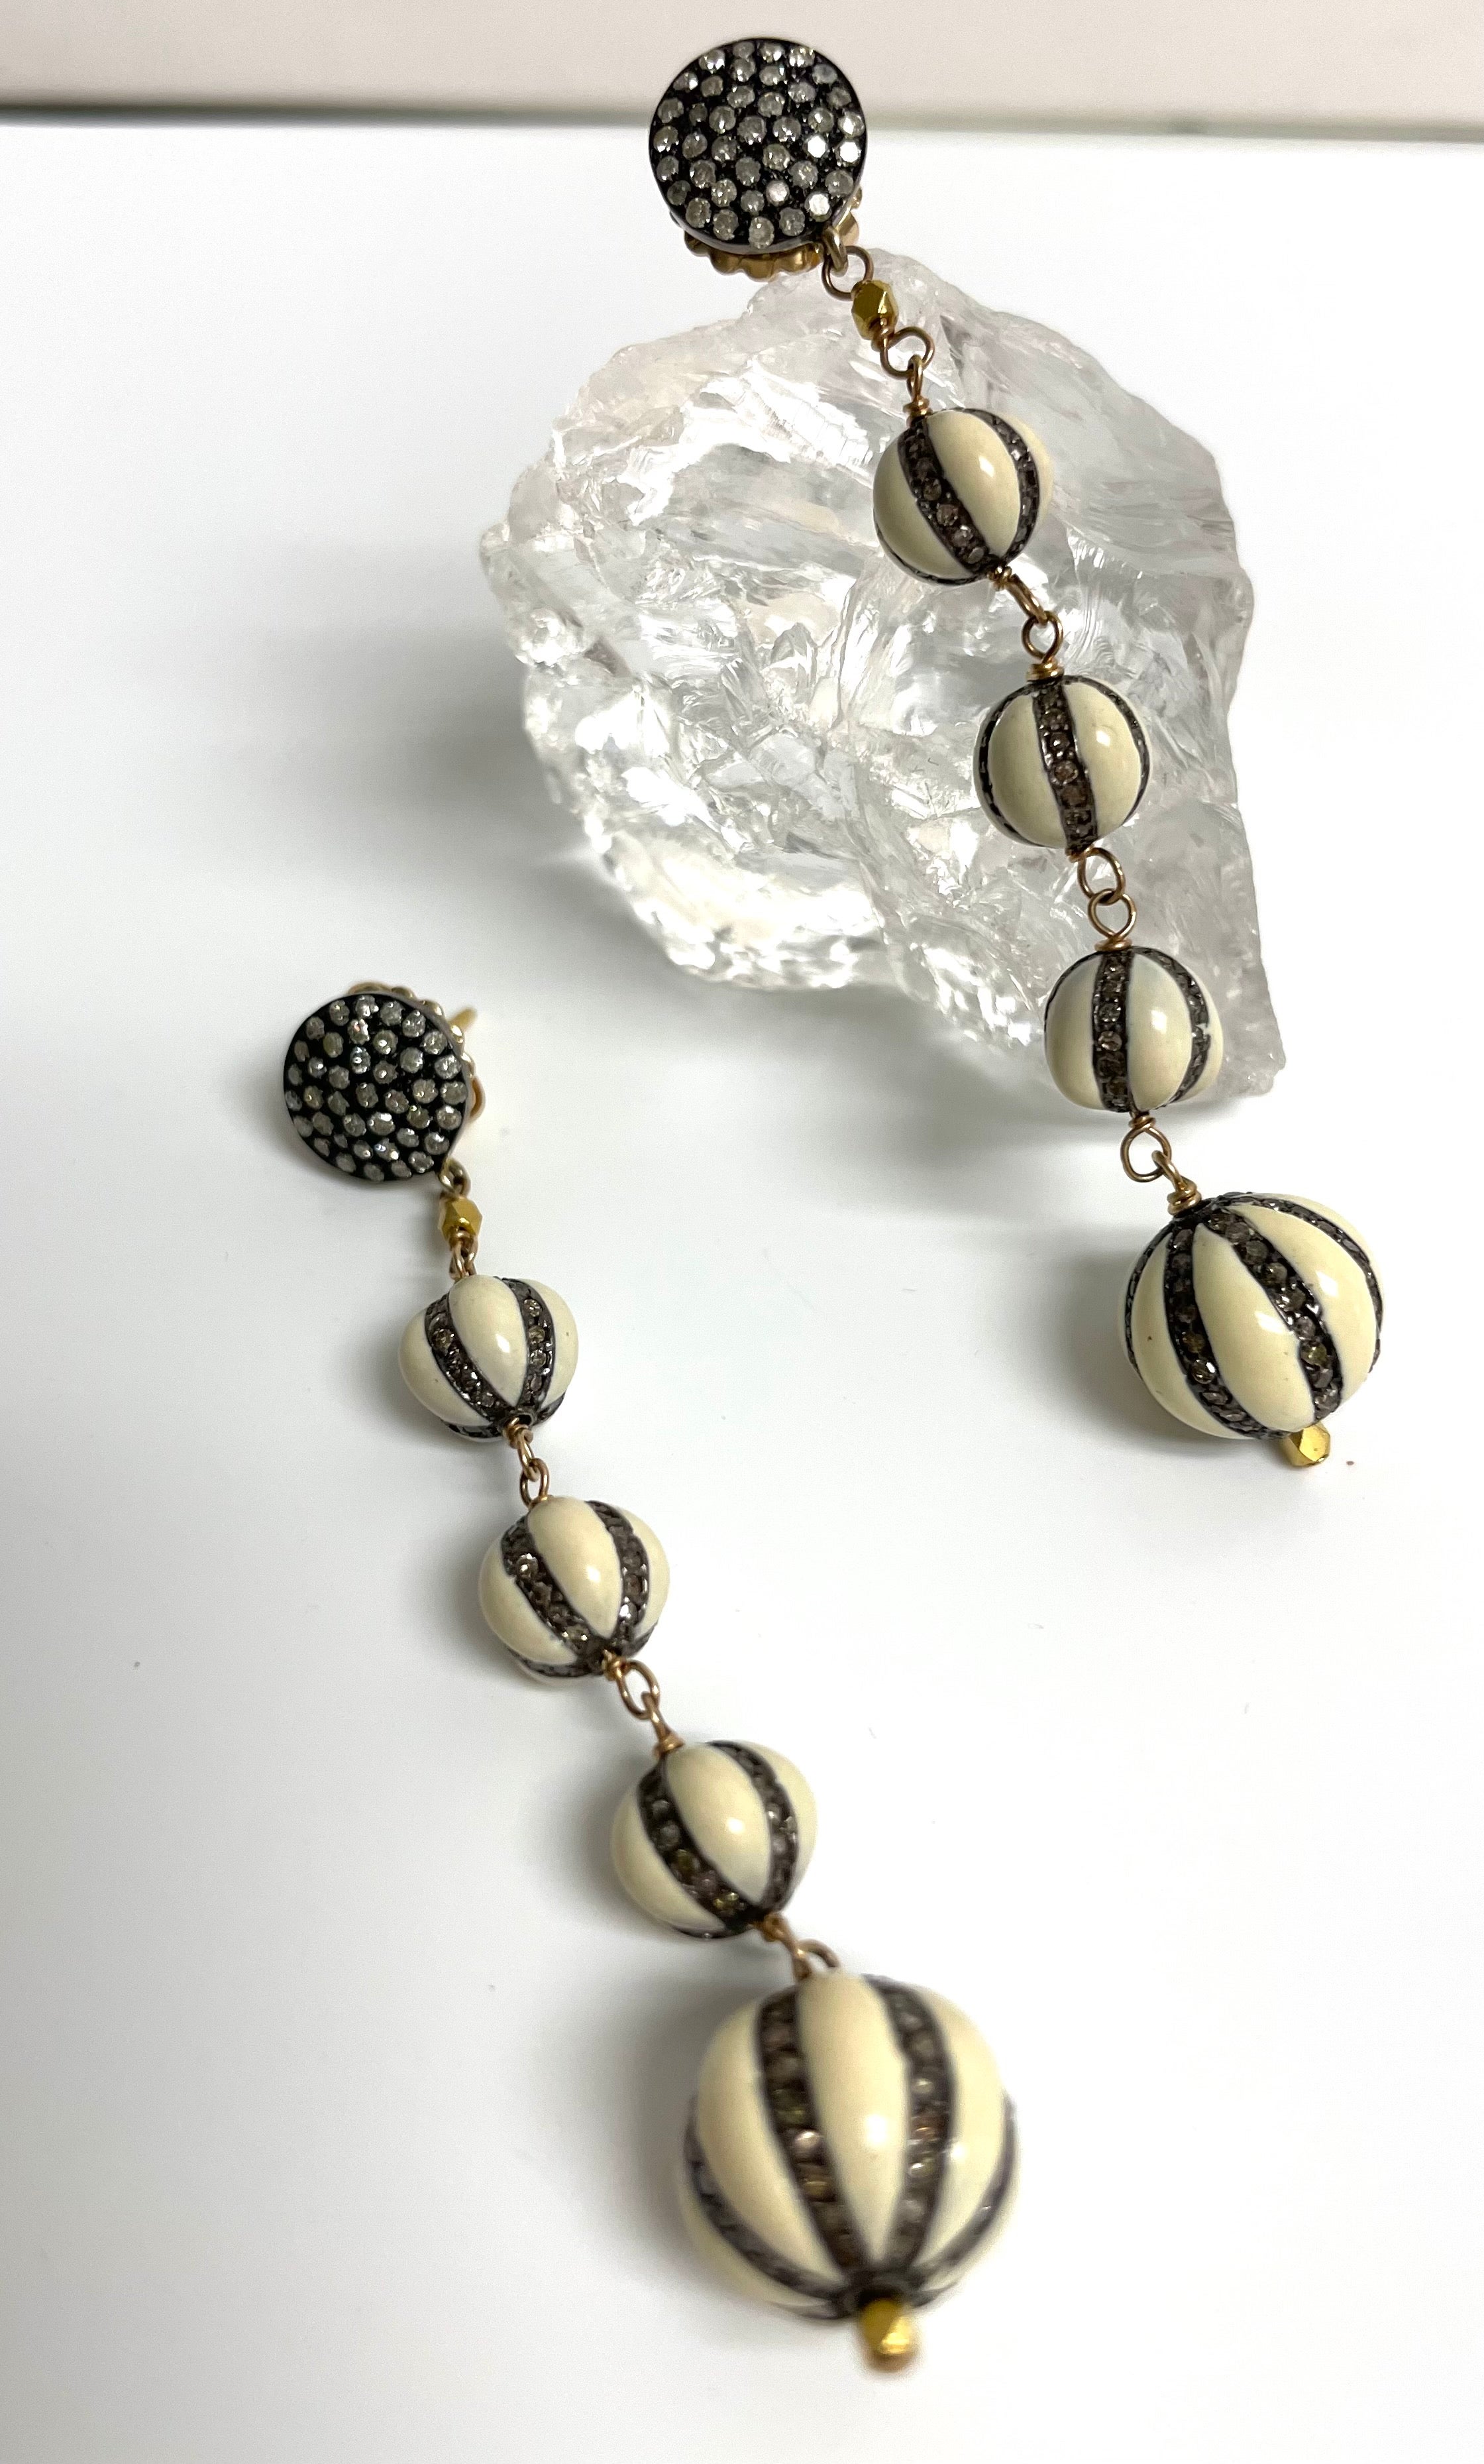 Enamel and Pave Diamond Melon Ball Design Earrings In New Condition For Sale In Laguna Beach, CA